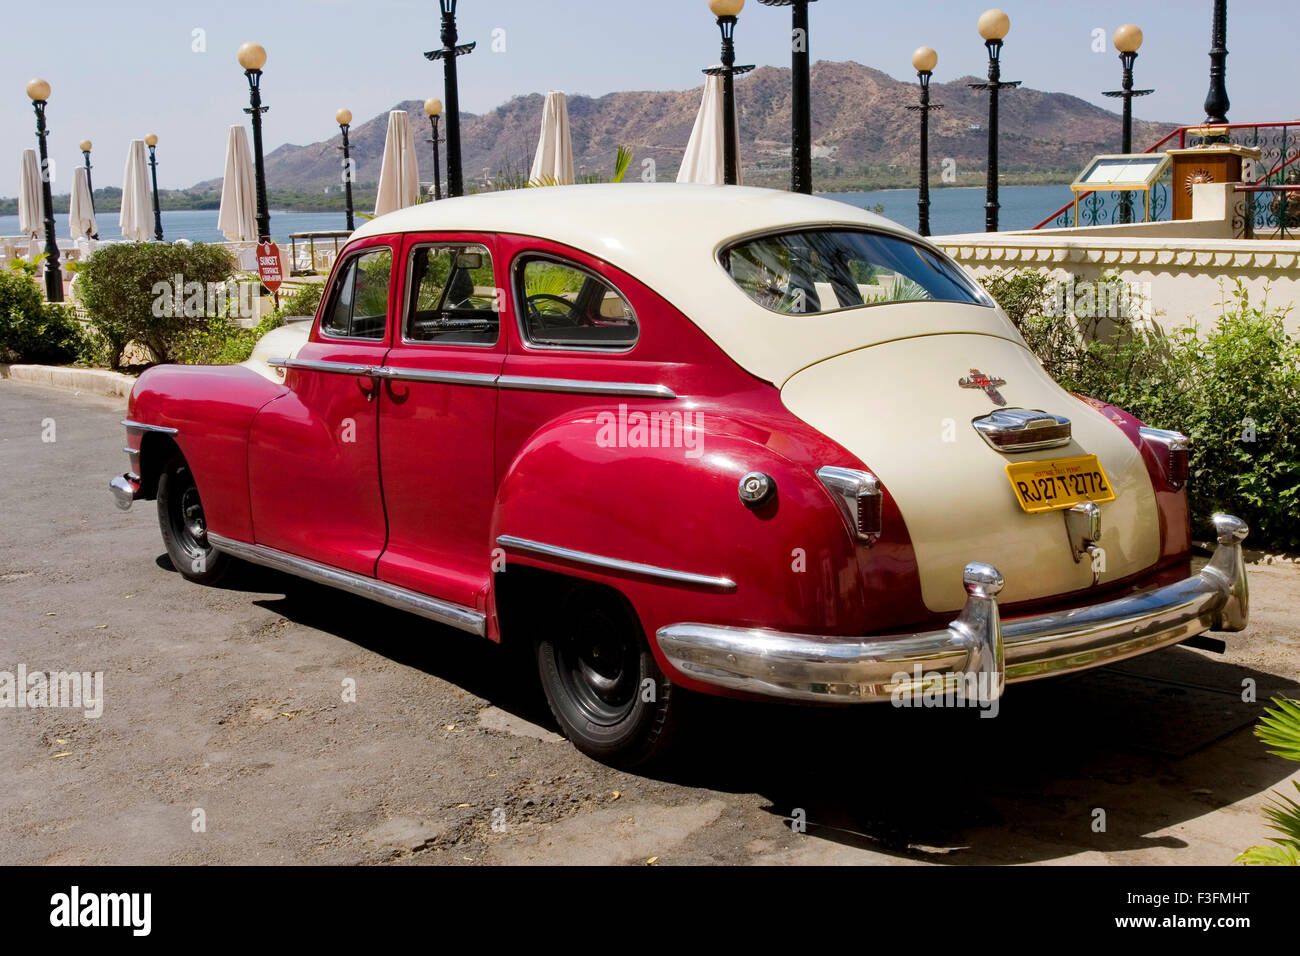 Heritage taxi, old car, vintage car, classic car, Udaipur ; Rajasthan ; India ; Asia Stock Photo